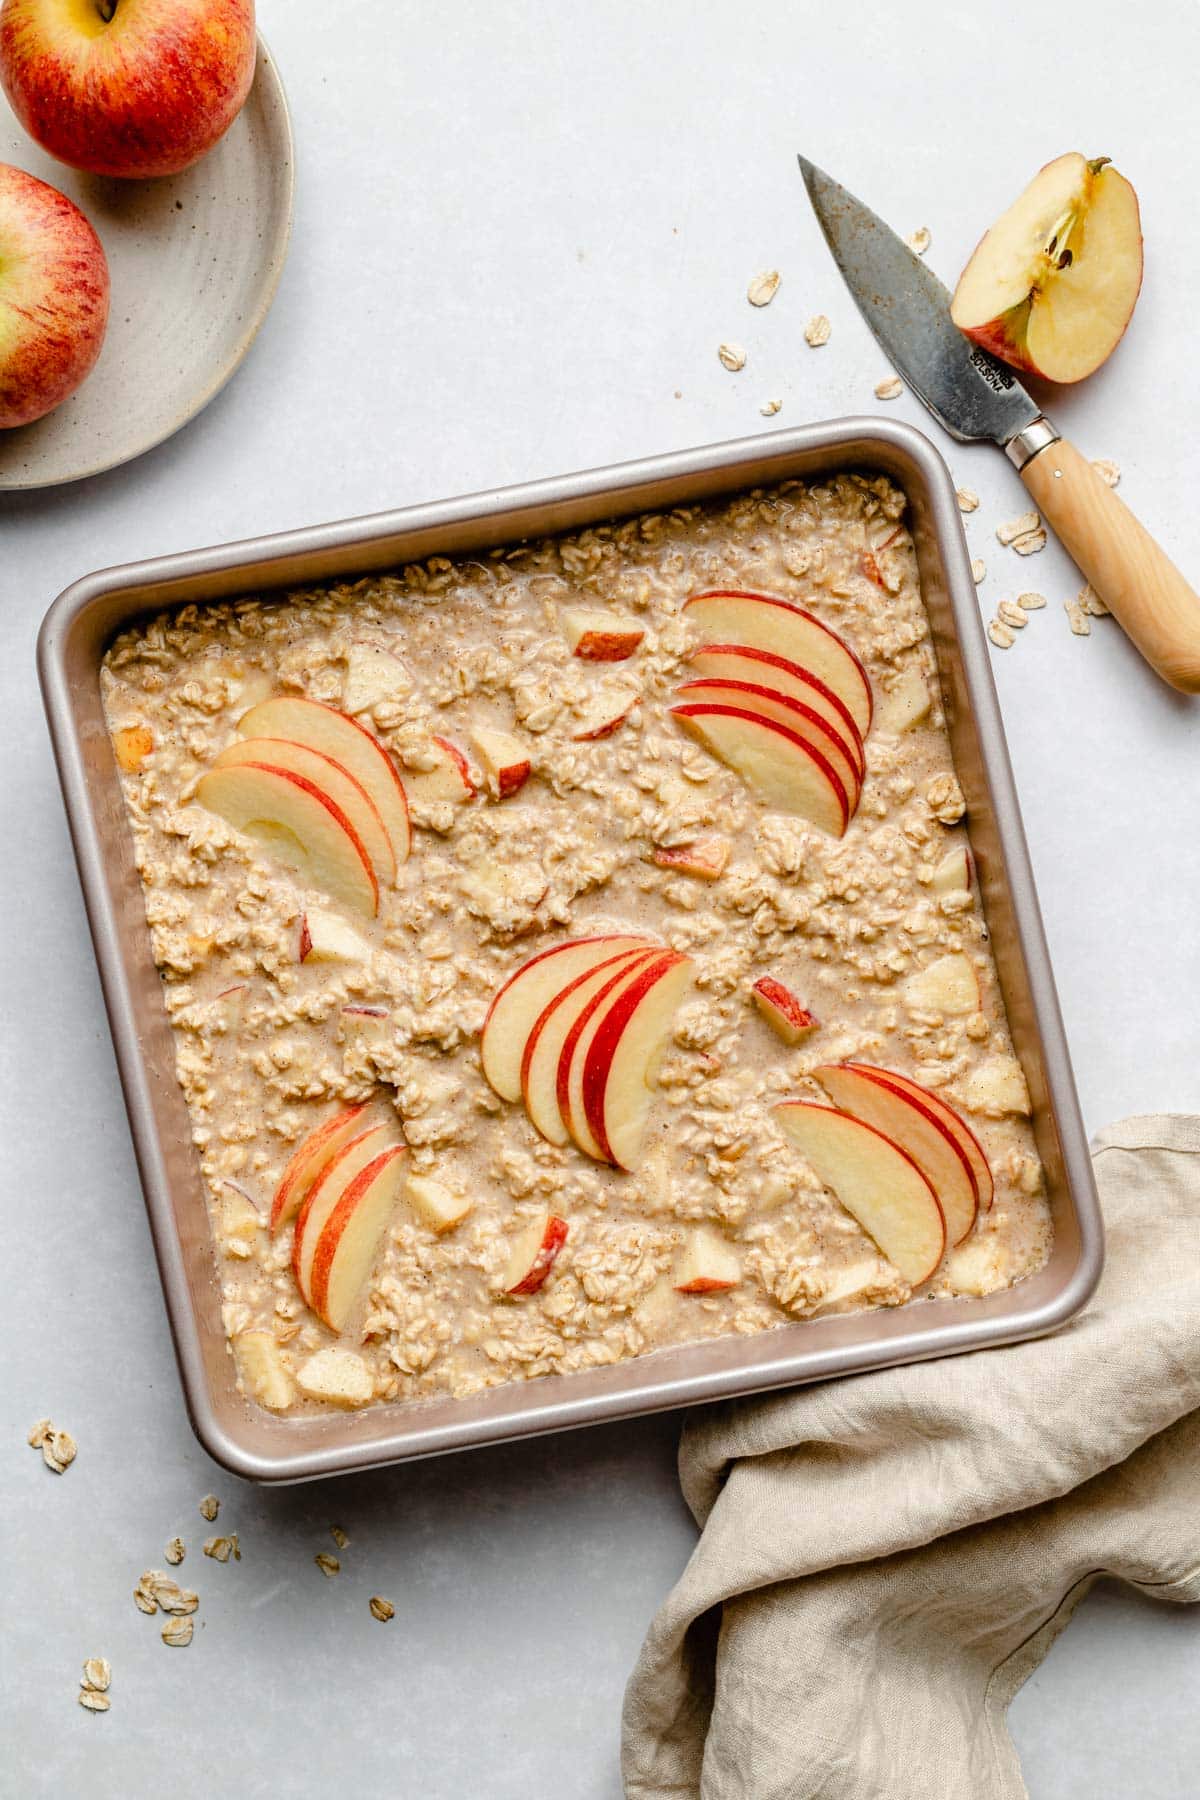 adding oatmeal and apple slices to a baking pan